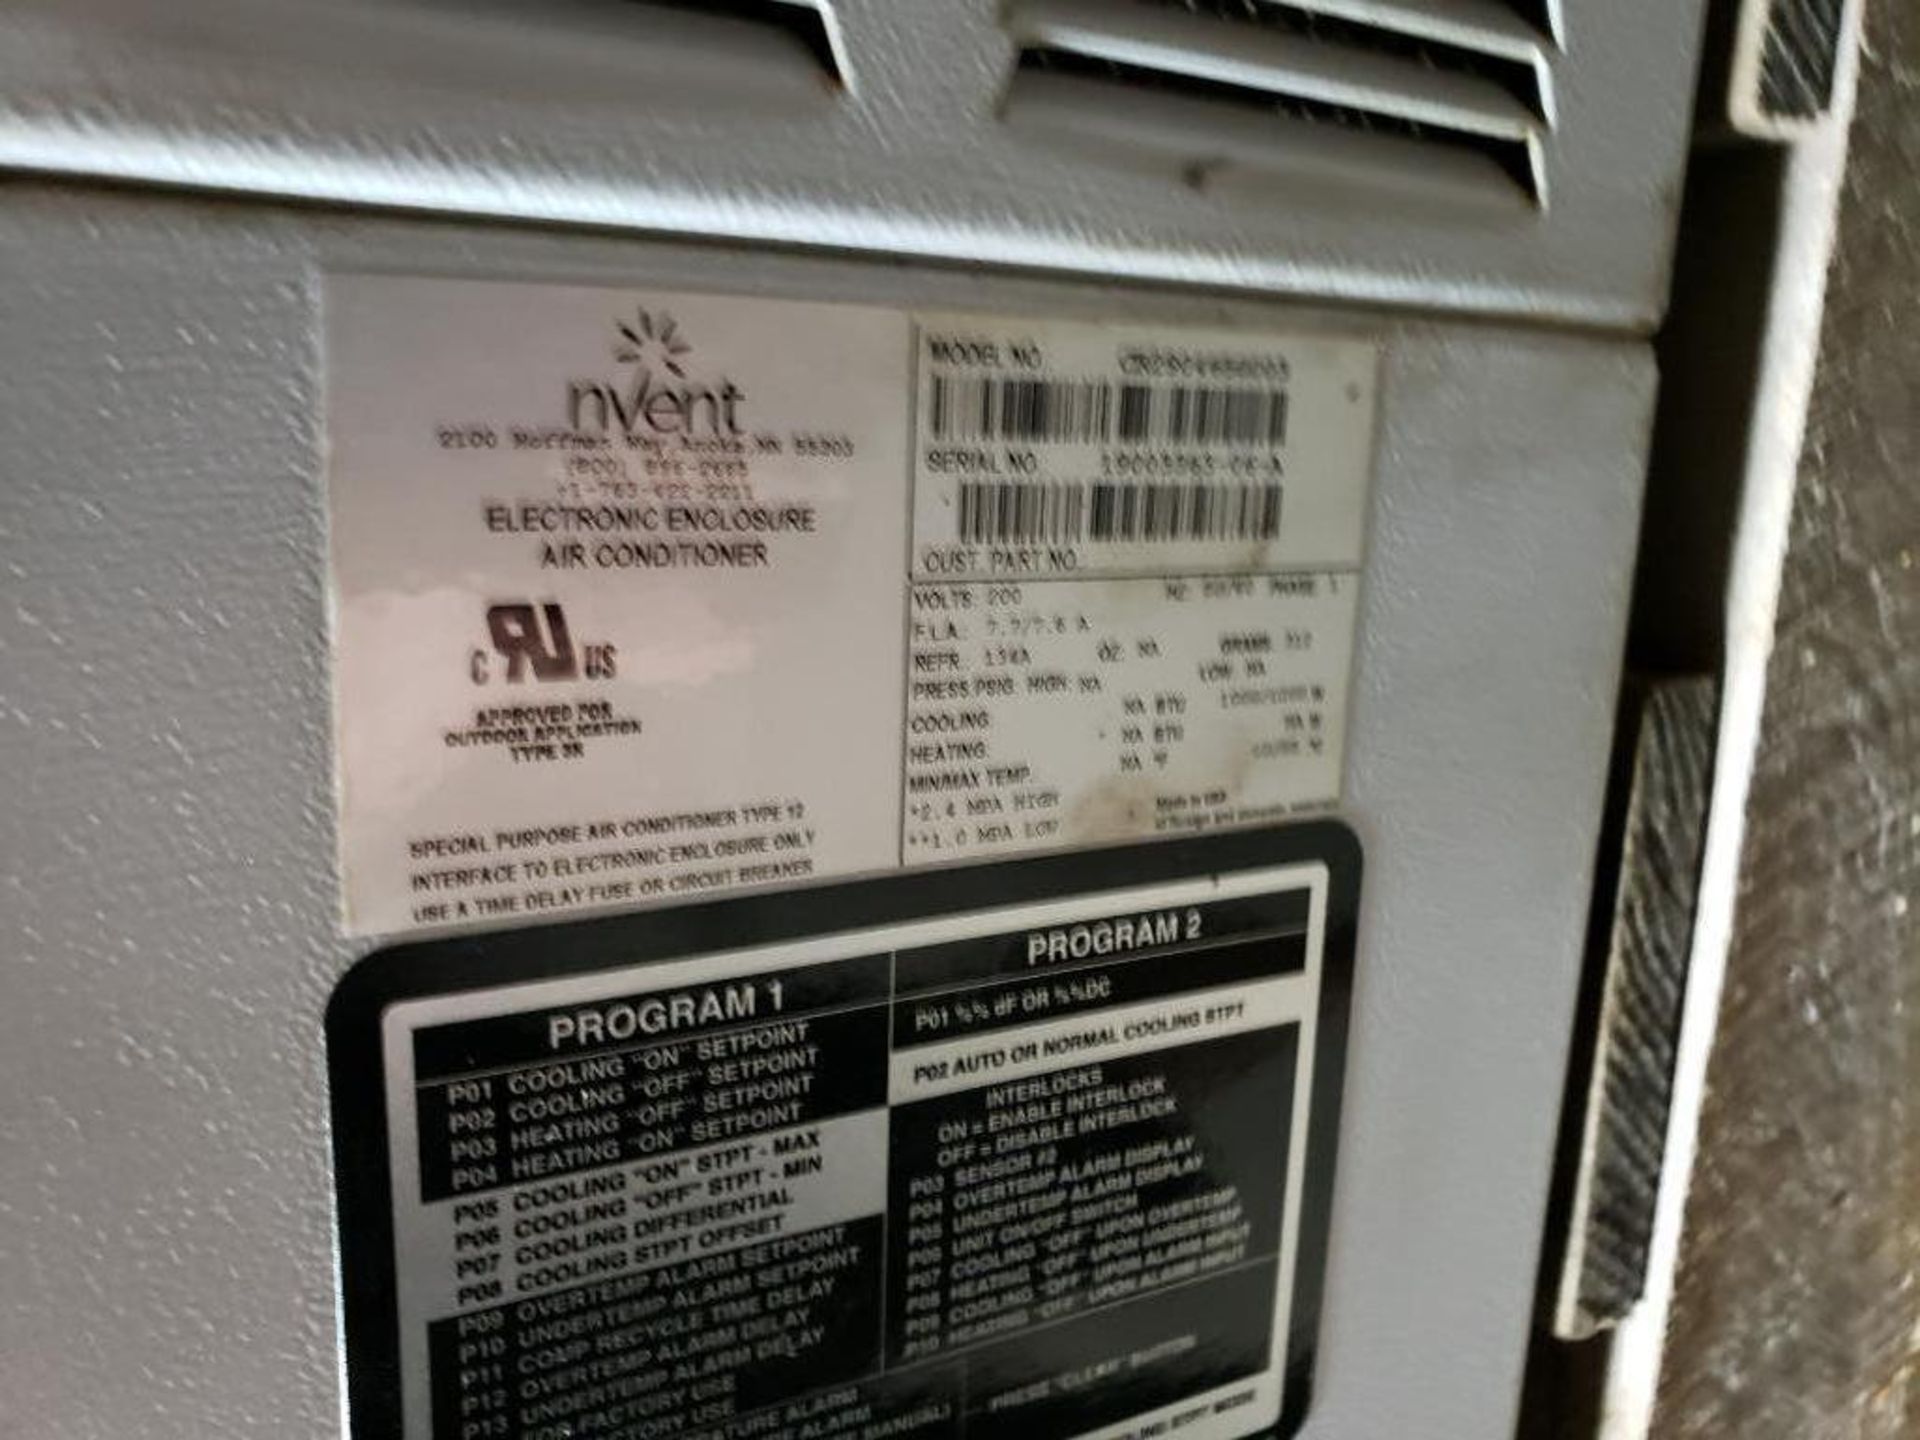 Nvent electronic enclosure air conditioner. - Image 2 of 3